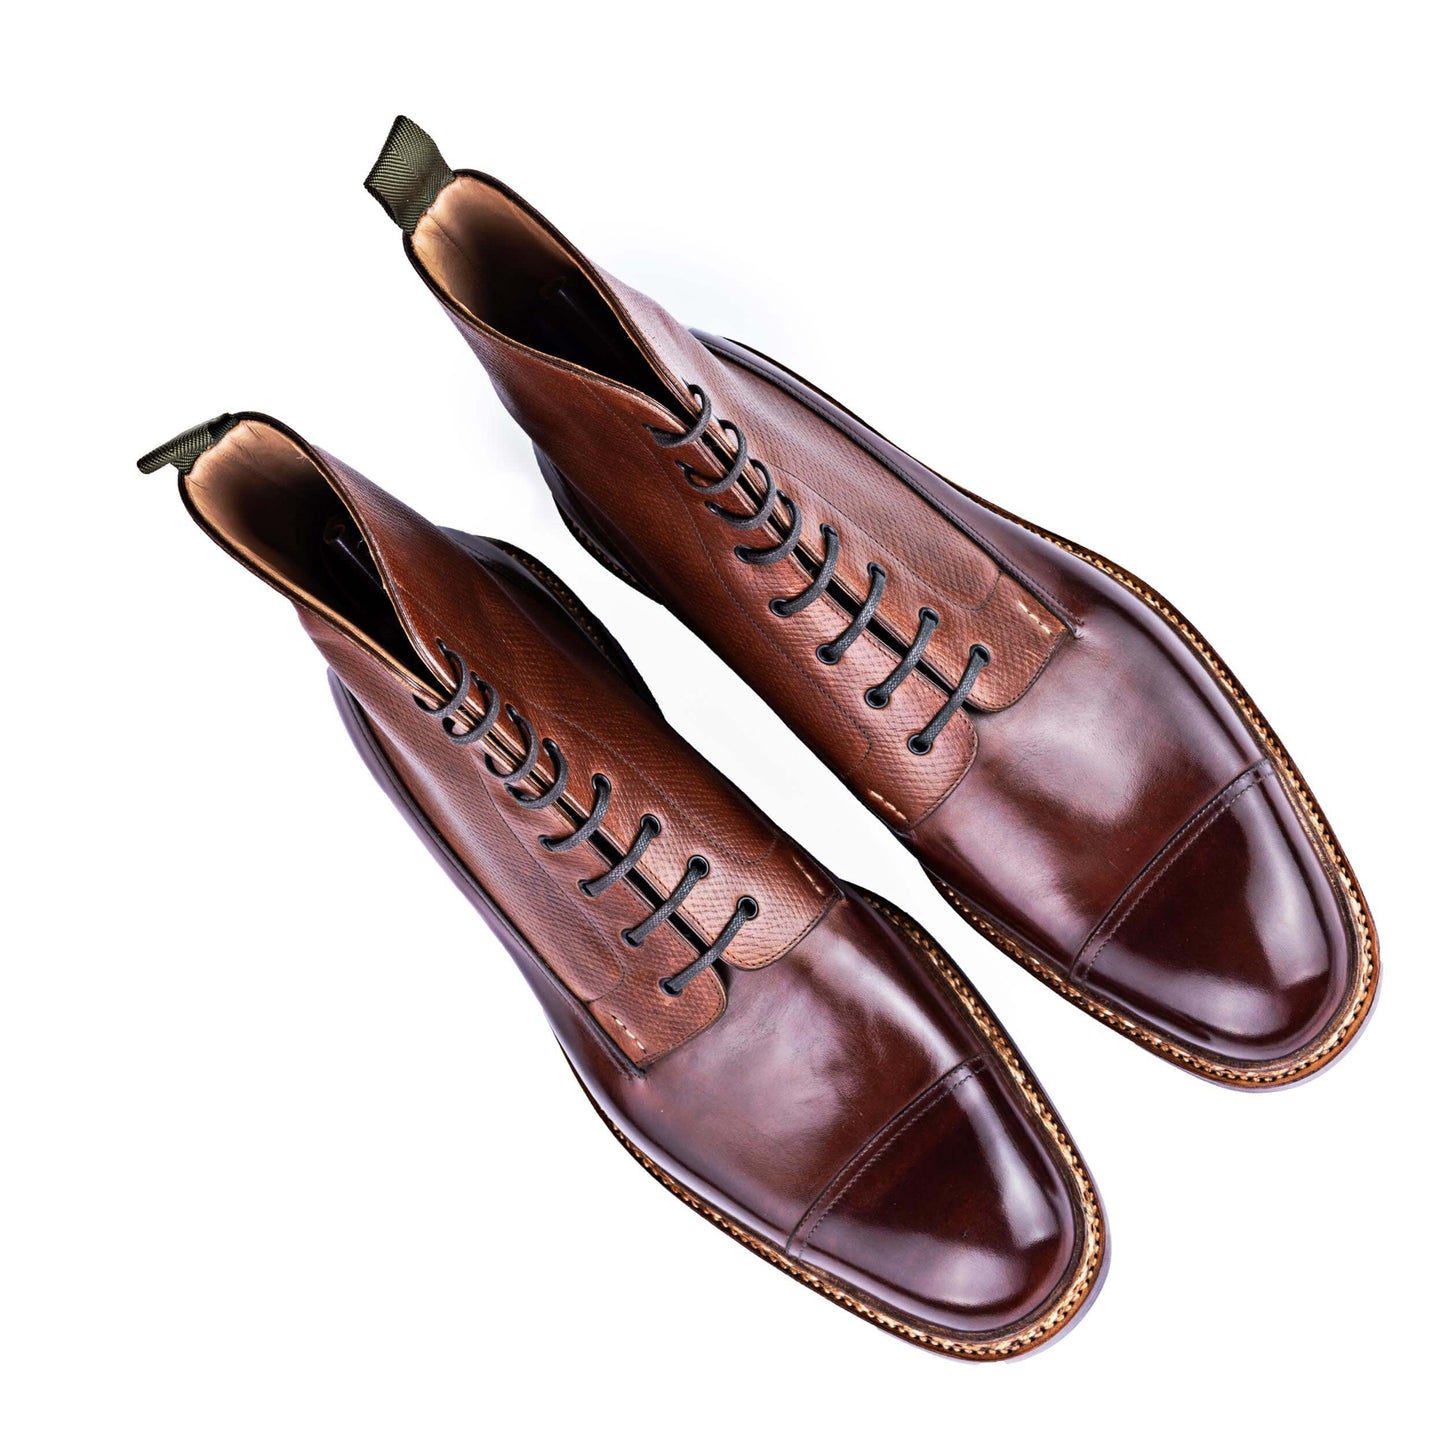 High Cut Derby Boots with straight toe cap in a mid brown calf-grain combo